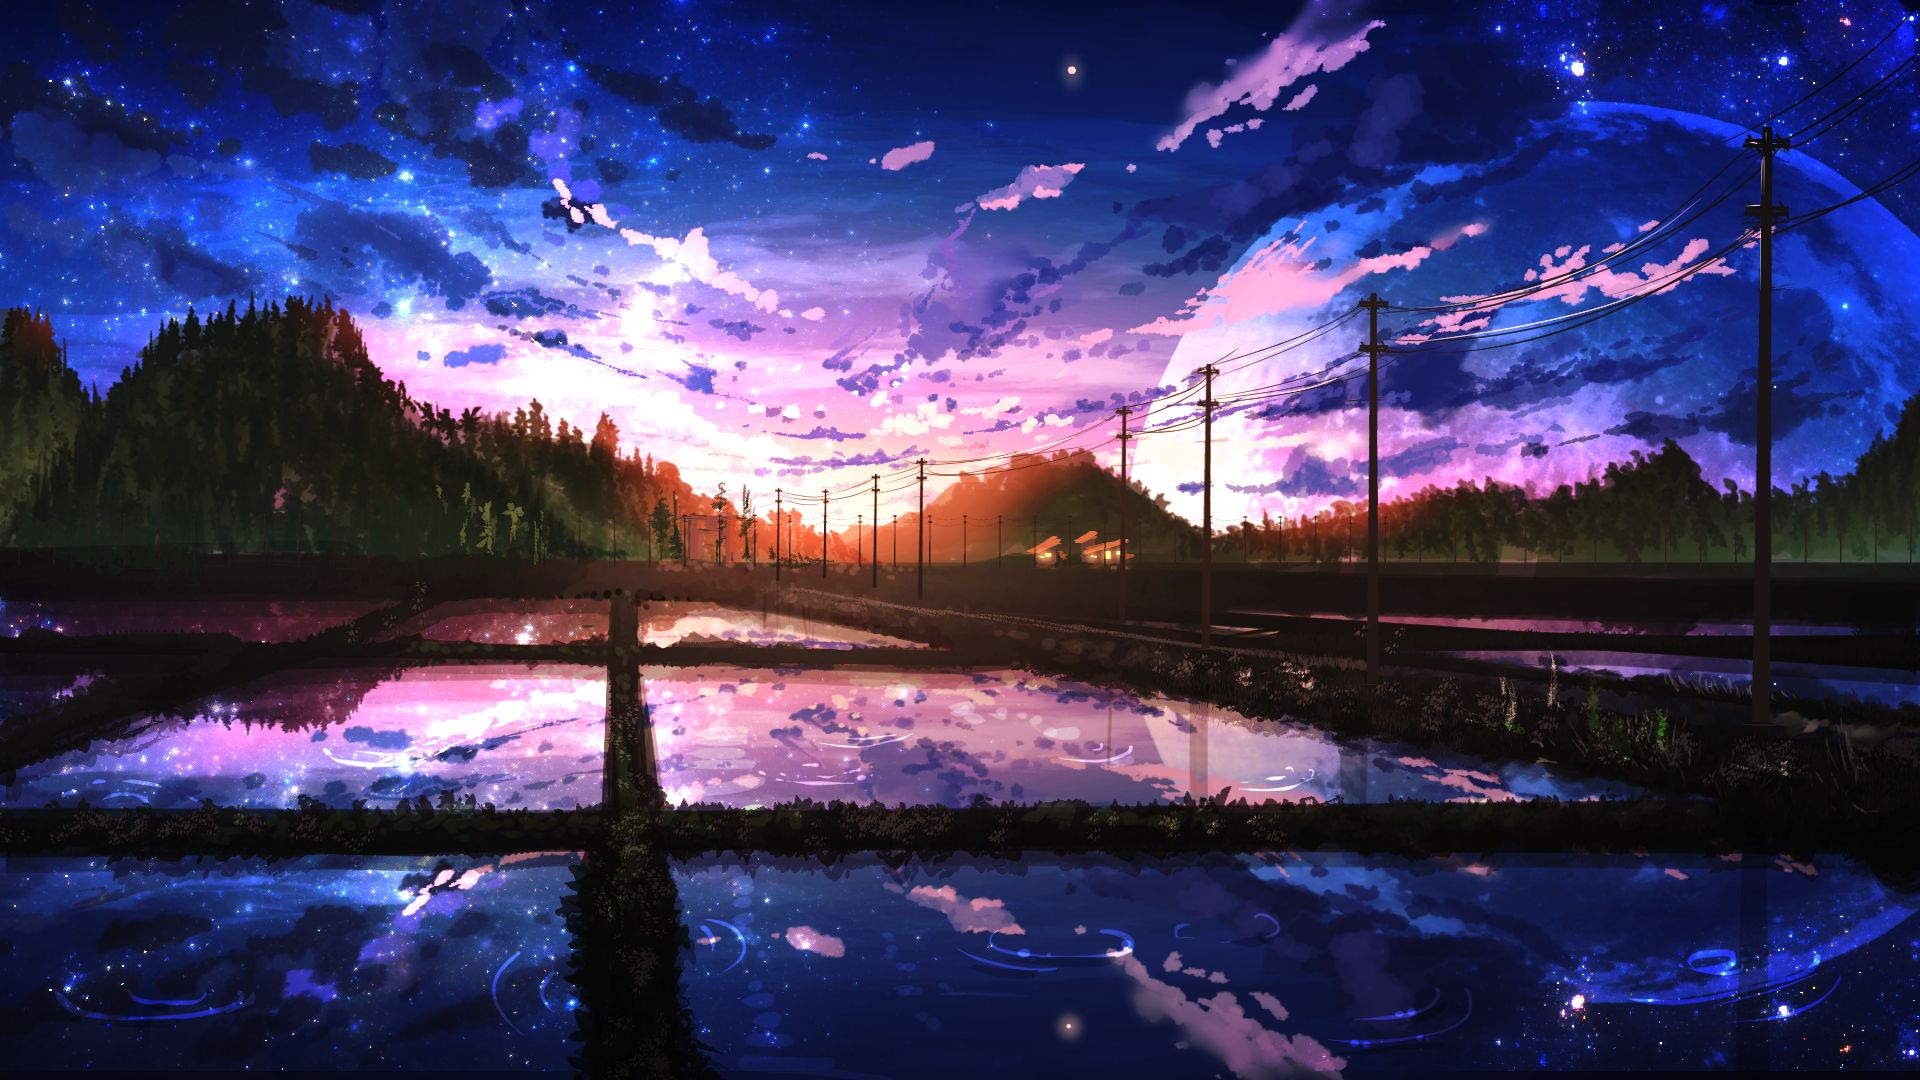 Anime Landscapes 4k Wallpapers - Wallpaper Cave